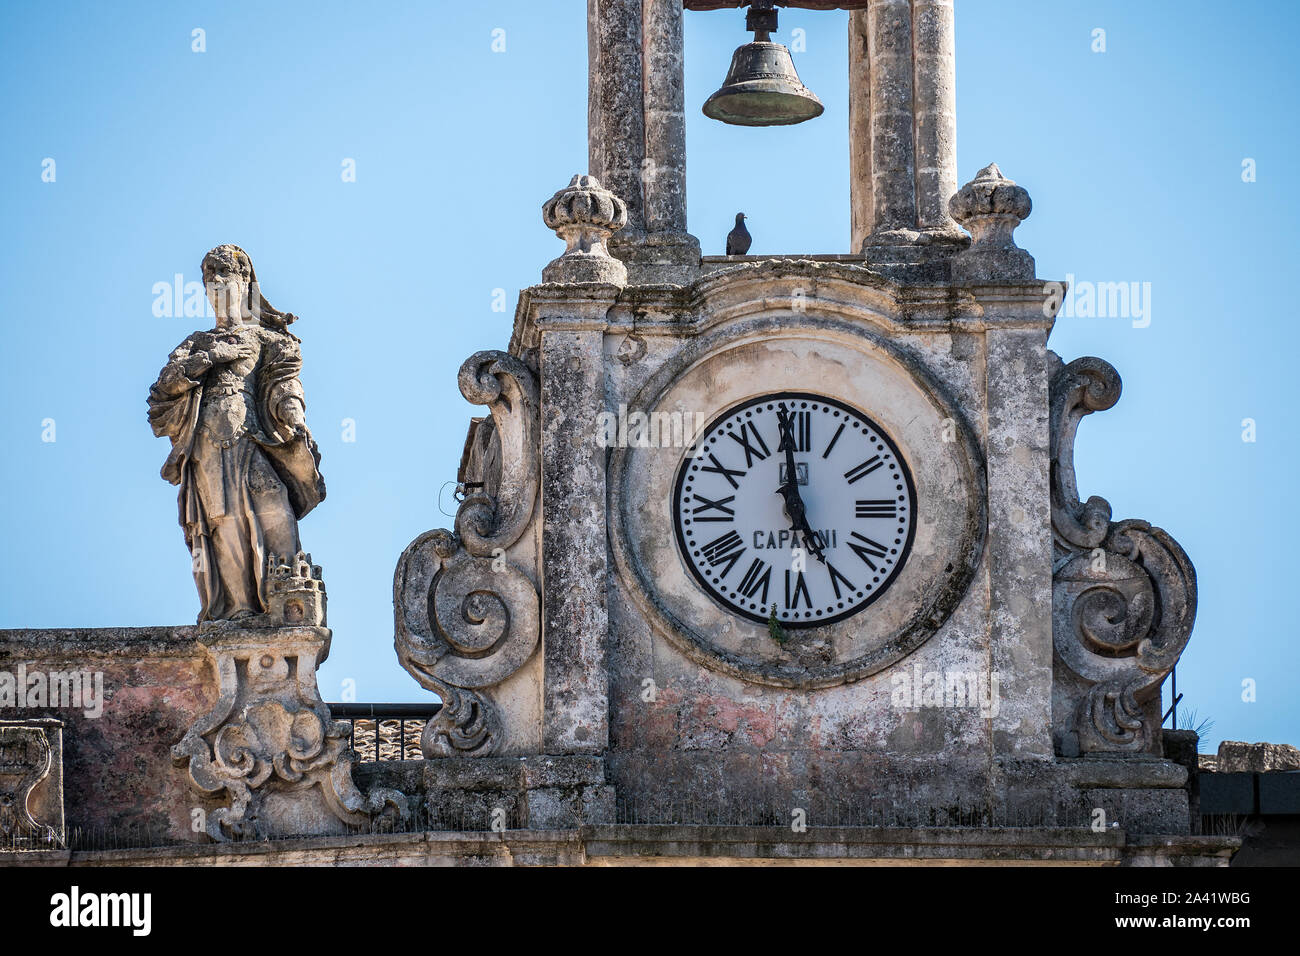 Detail of clock tower and Bell of Palazzo del Sedile, Town Hall in Matera, Italy, Matera is European capital of Culture 2019, Unesco heritage city Stock Photo